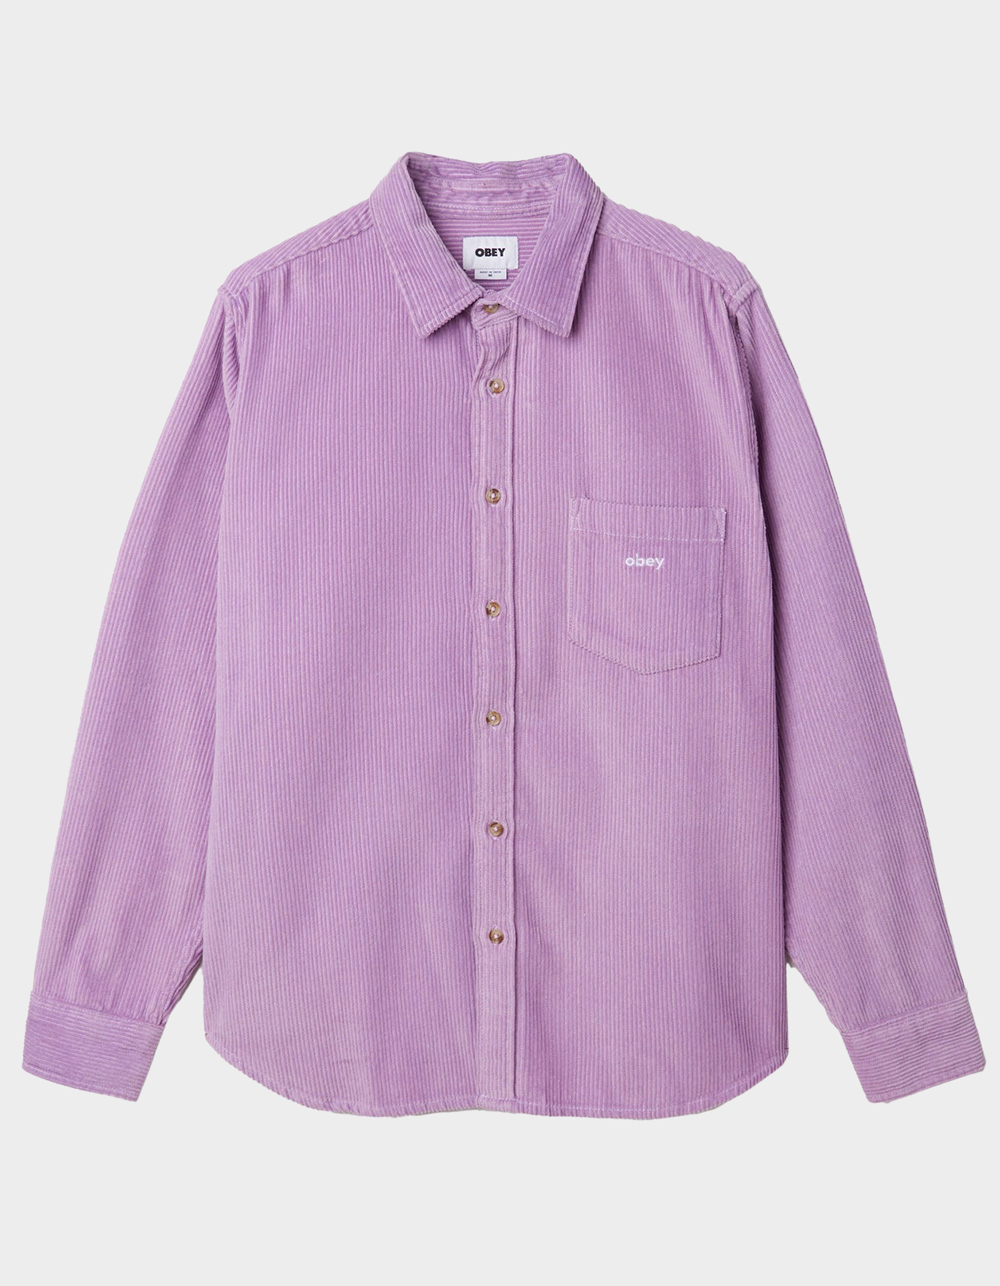 OBEY Miles Mens Woven Shirt